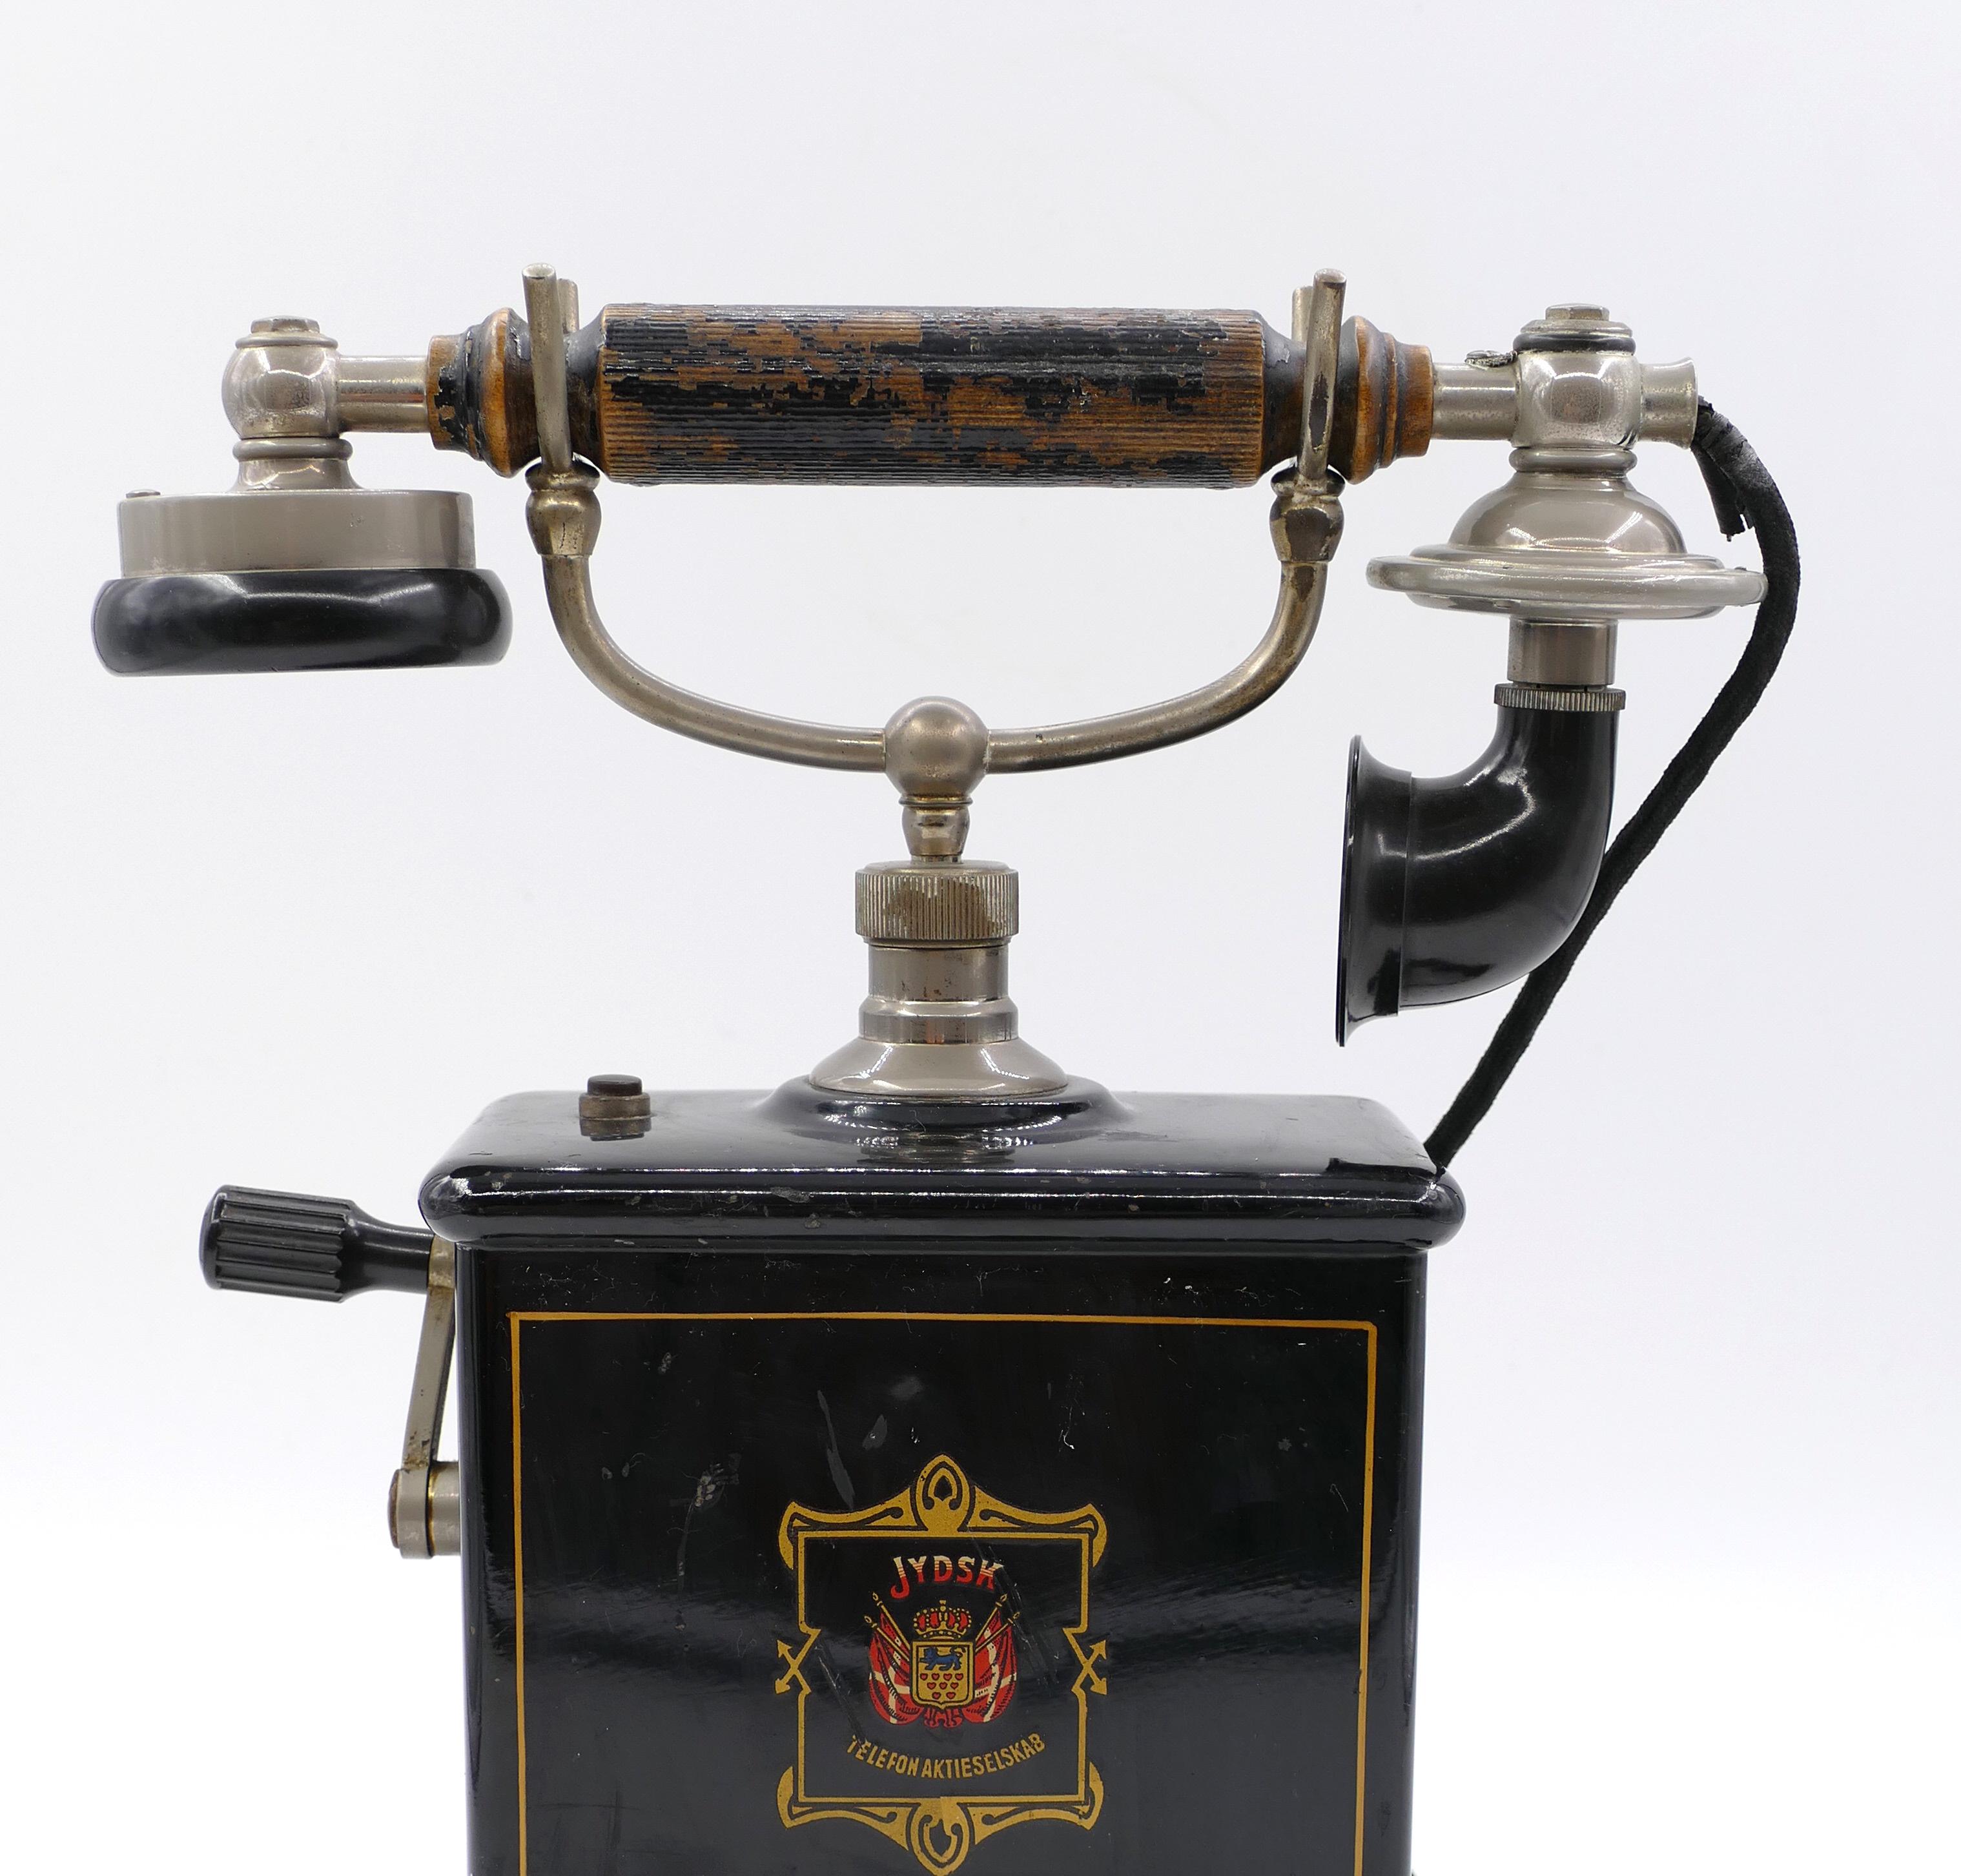 This Danish JYDSK Phone is an antique office desk manufactured in the 20th century.

Made of metal and bakelite.

Untested function.

Logo of the telephone company JYDSK on the front.

Founded in 1895, Jydsk Telefon of Denmark was famous for